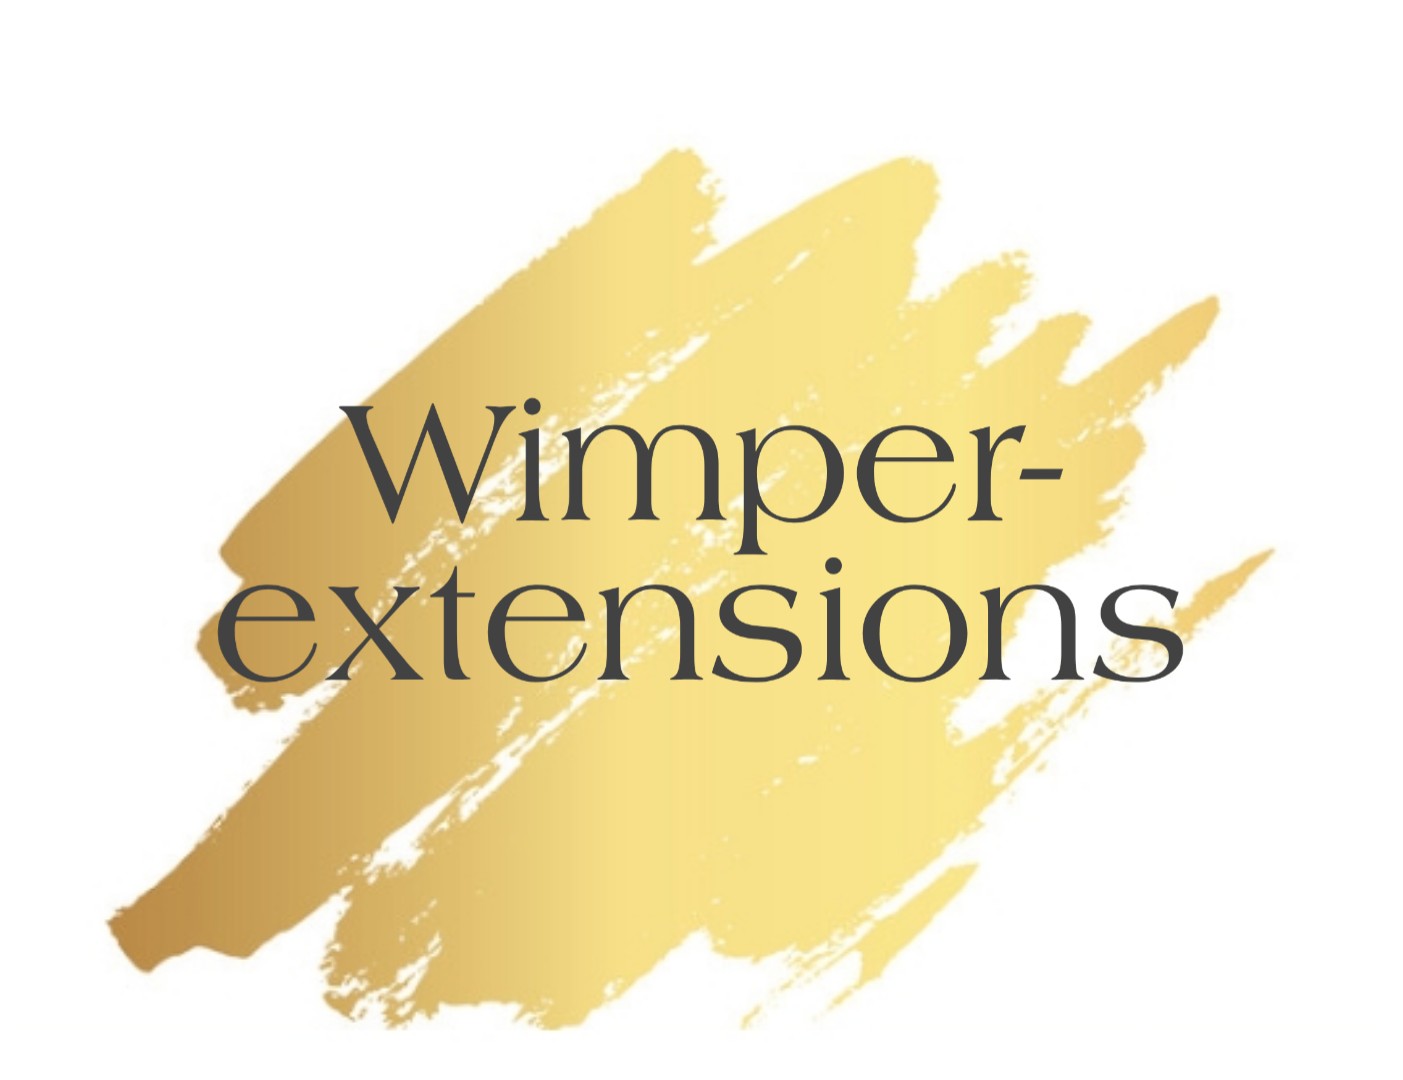 wimperextensions